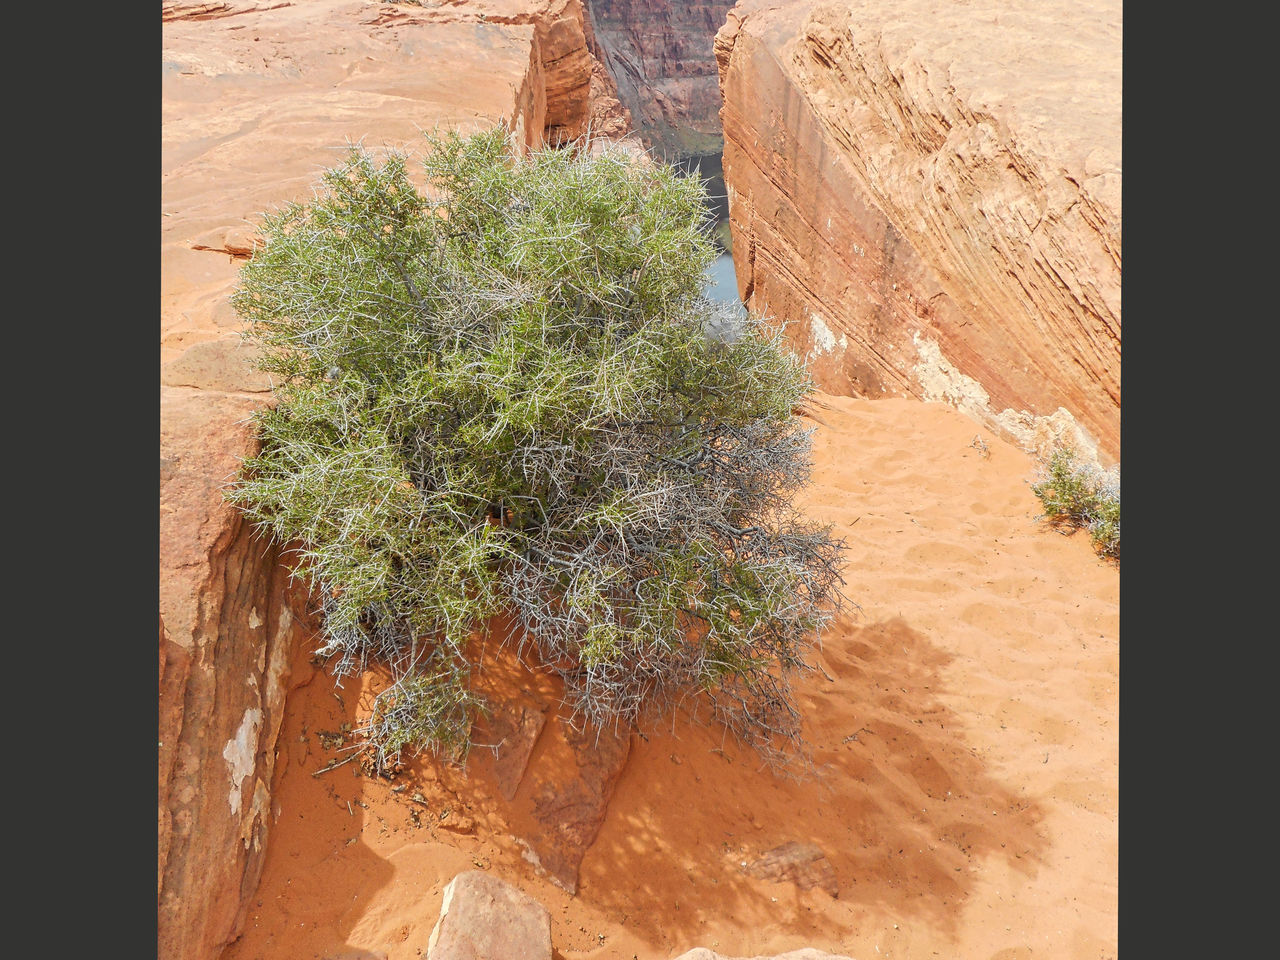 HIGH ANGLE VIEW OF ROCK FORMATION ON LAND